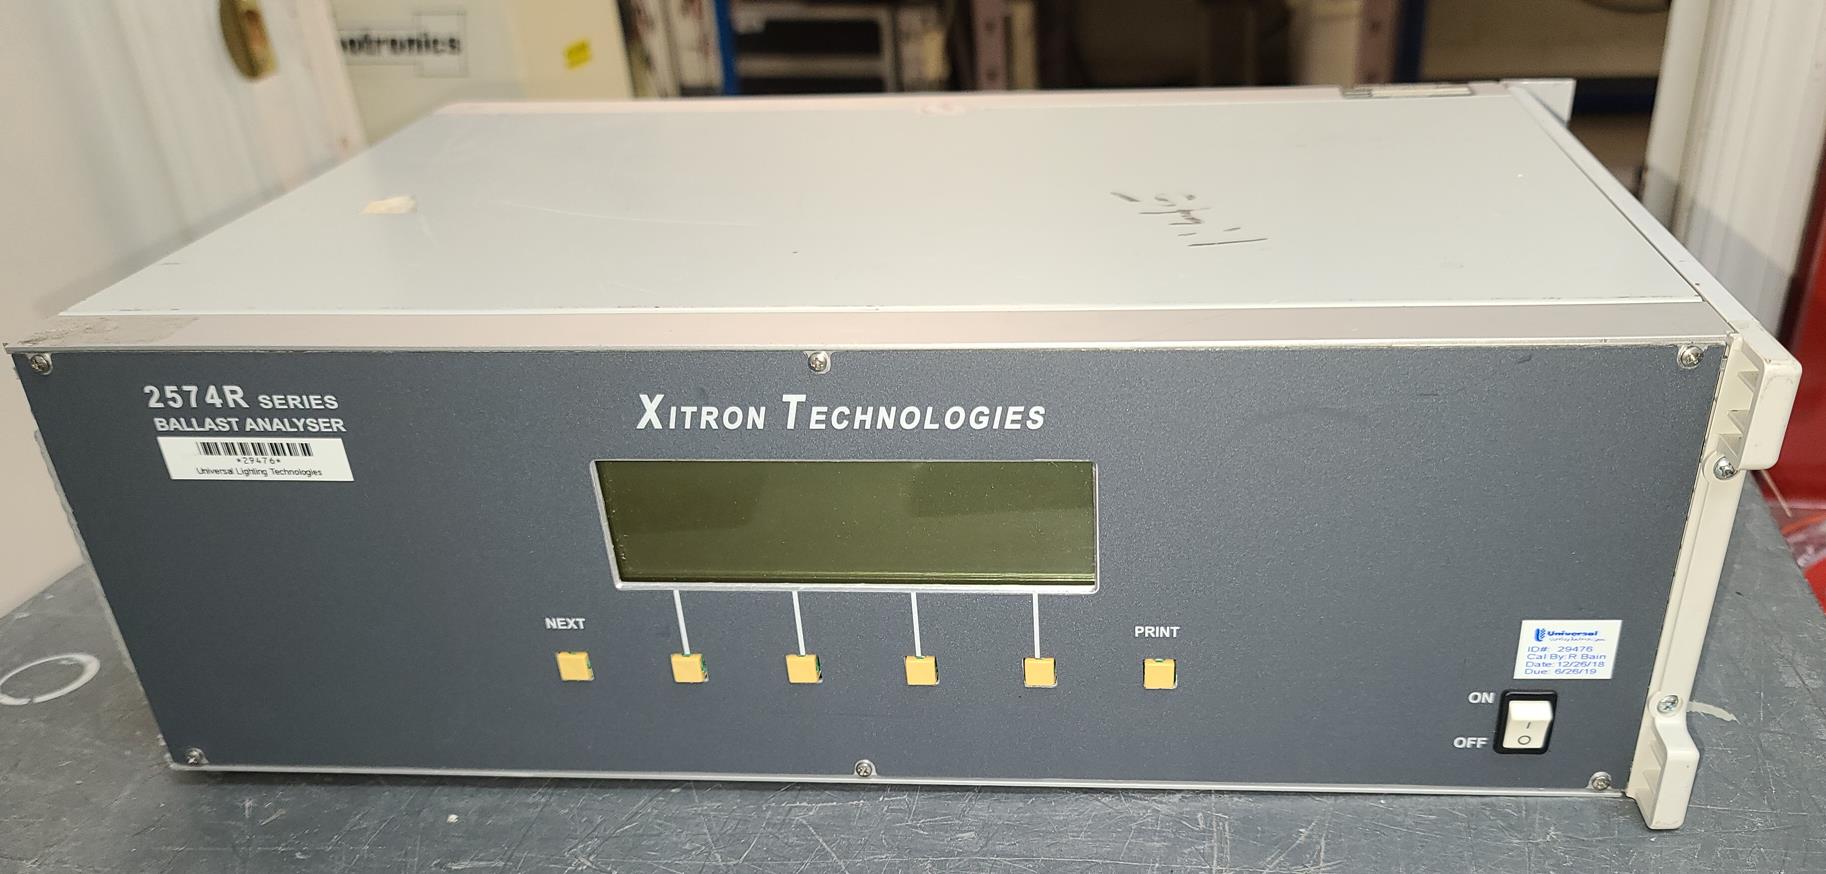 Xitron Technologies 2574R for sale